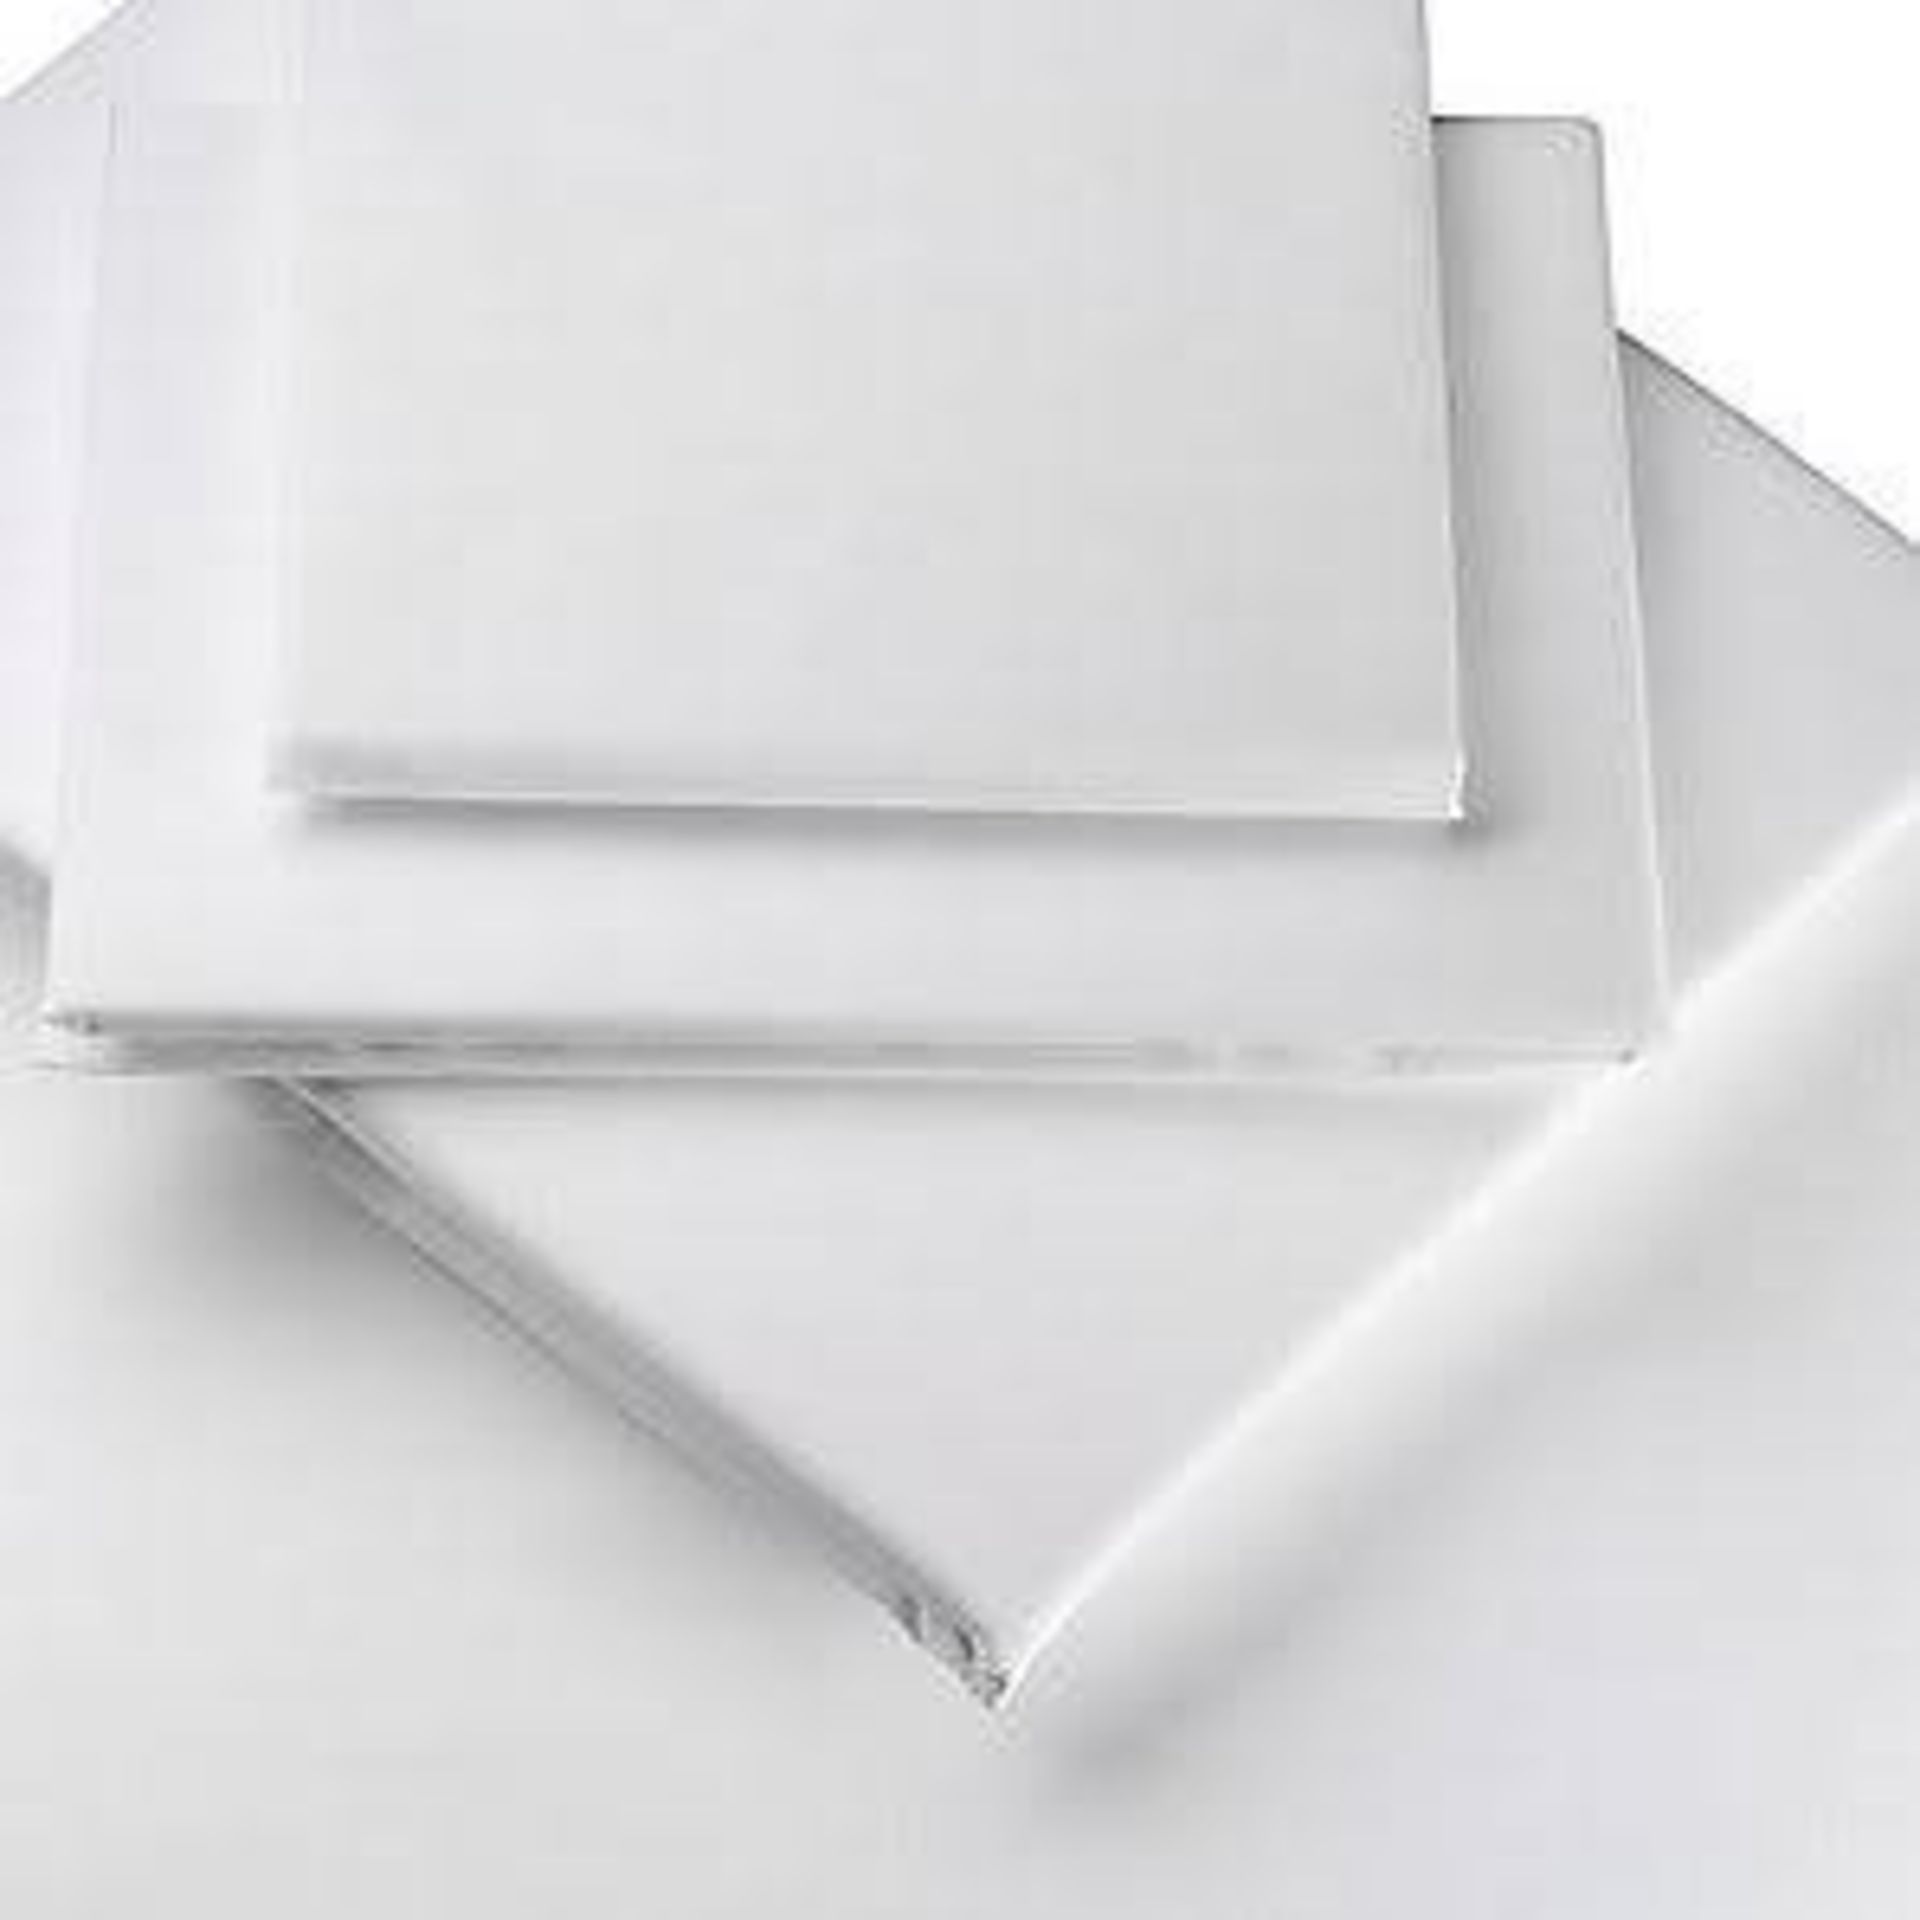 V Brand New Luxury Egyptian Cotton Percale King Size Fitted Sheet White ISP £25.99 Homescapes (